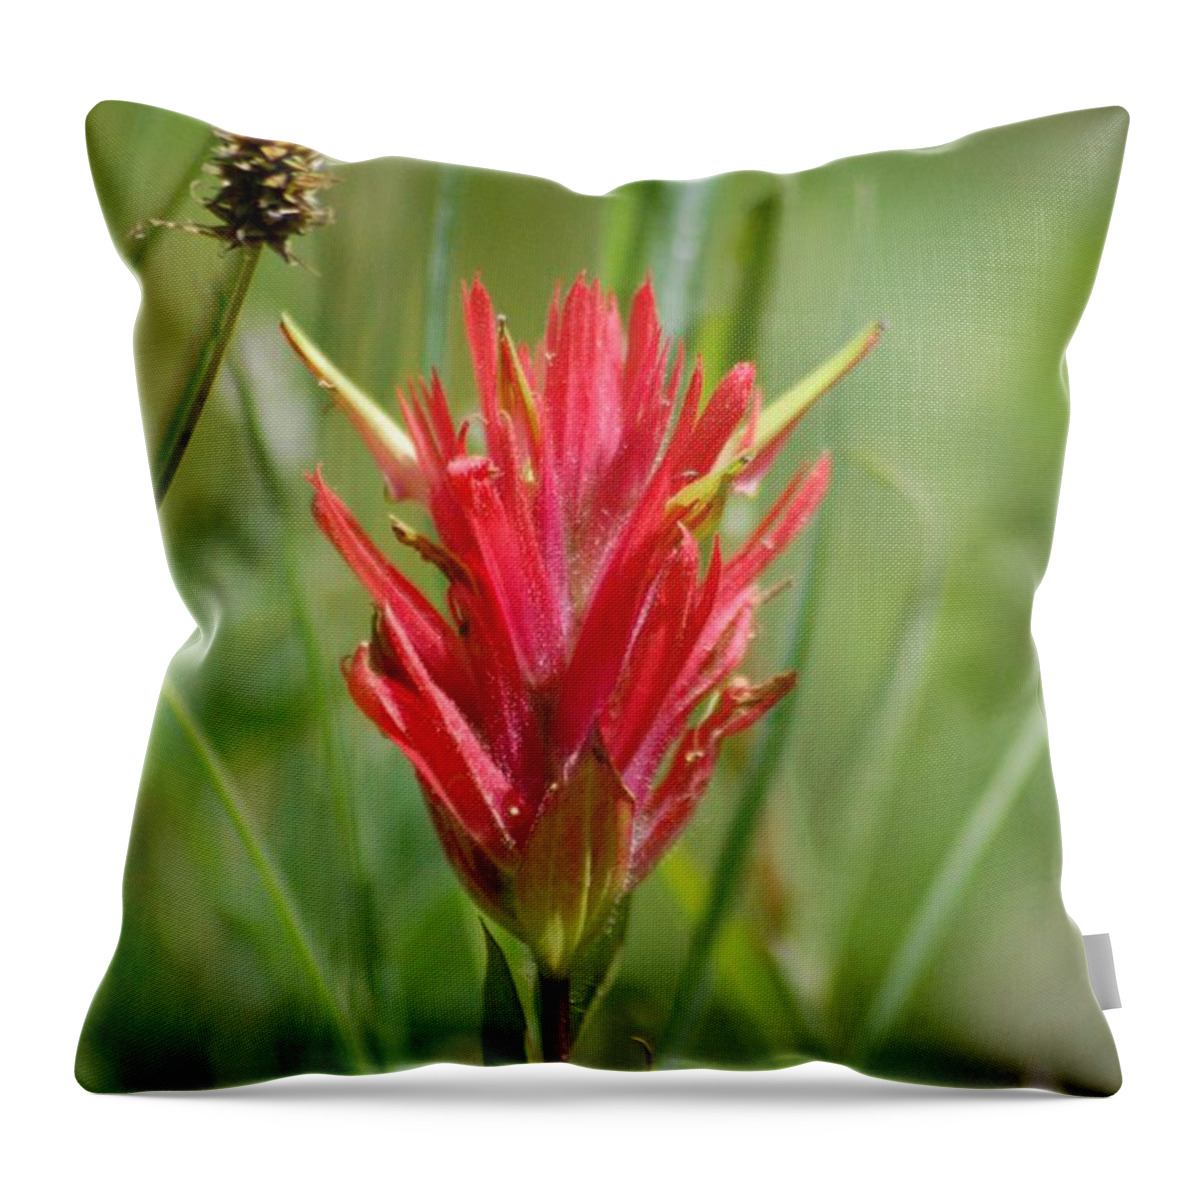 Plants And Flowers Throw Pillow featuring the photograph Indian Paintbrush by D Nigon